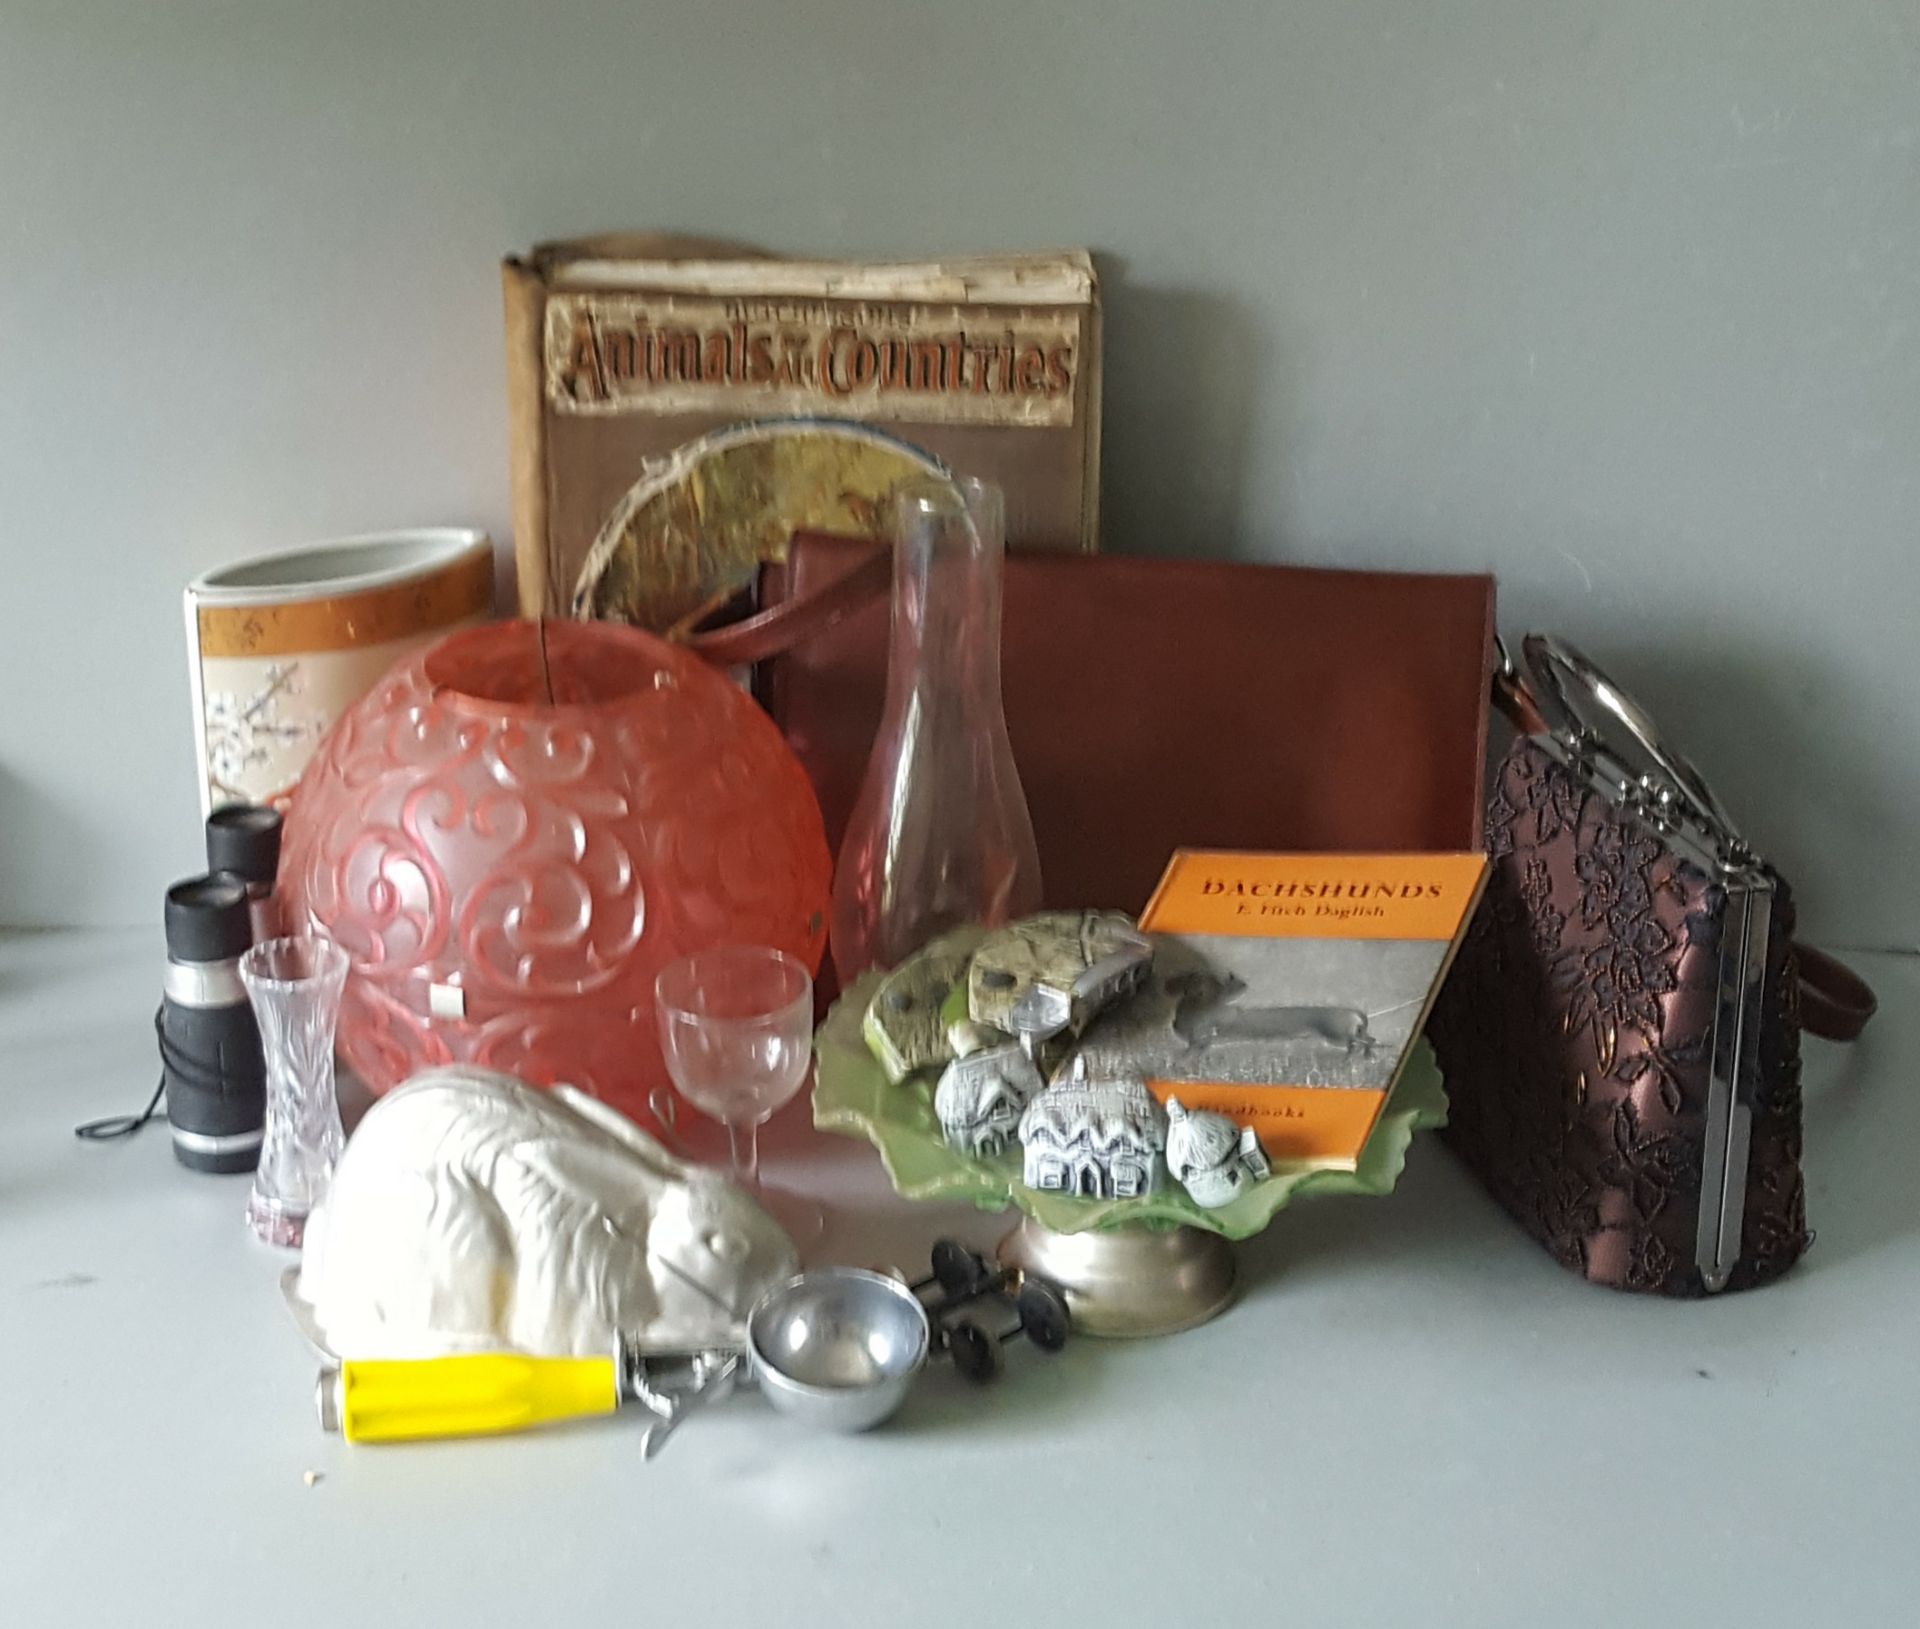 Vintage Retro Parcel Items Includes Lighting Jelly Mould Cake Stand Bags Books Etc. - No Reserve